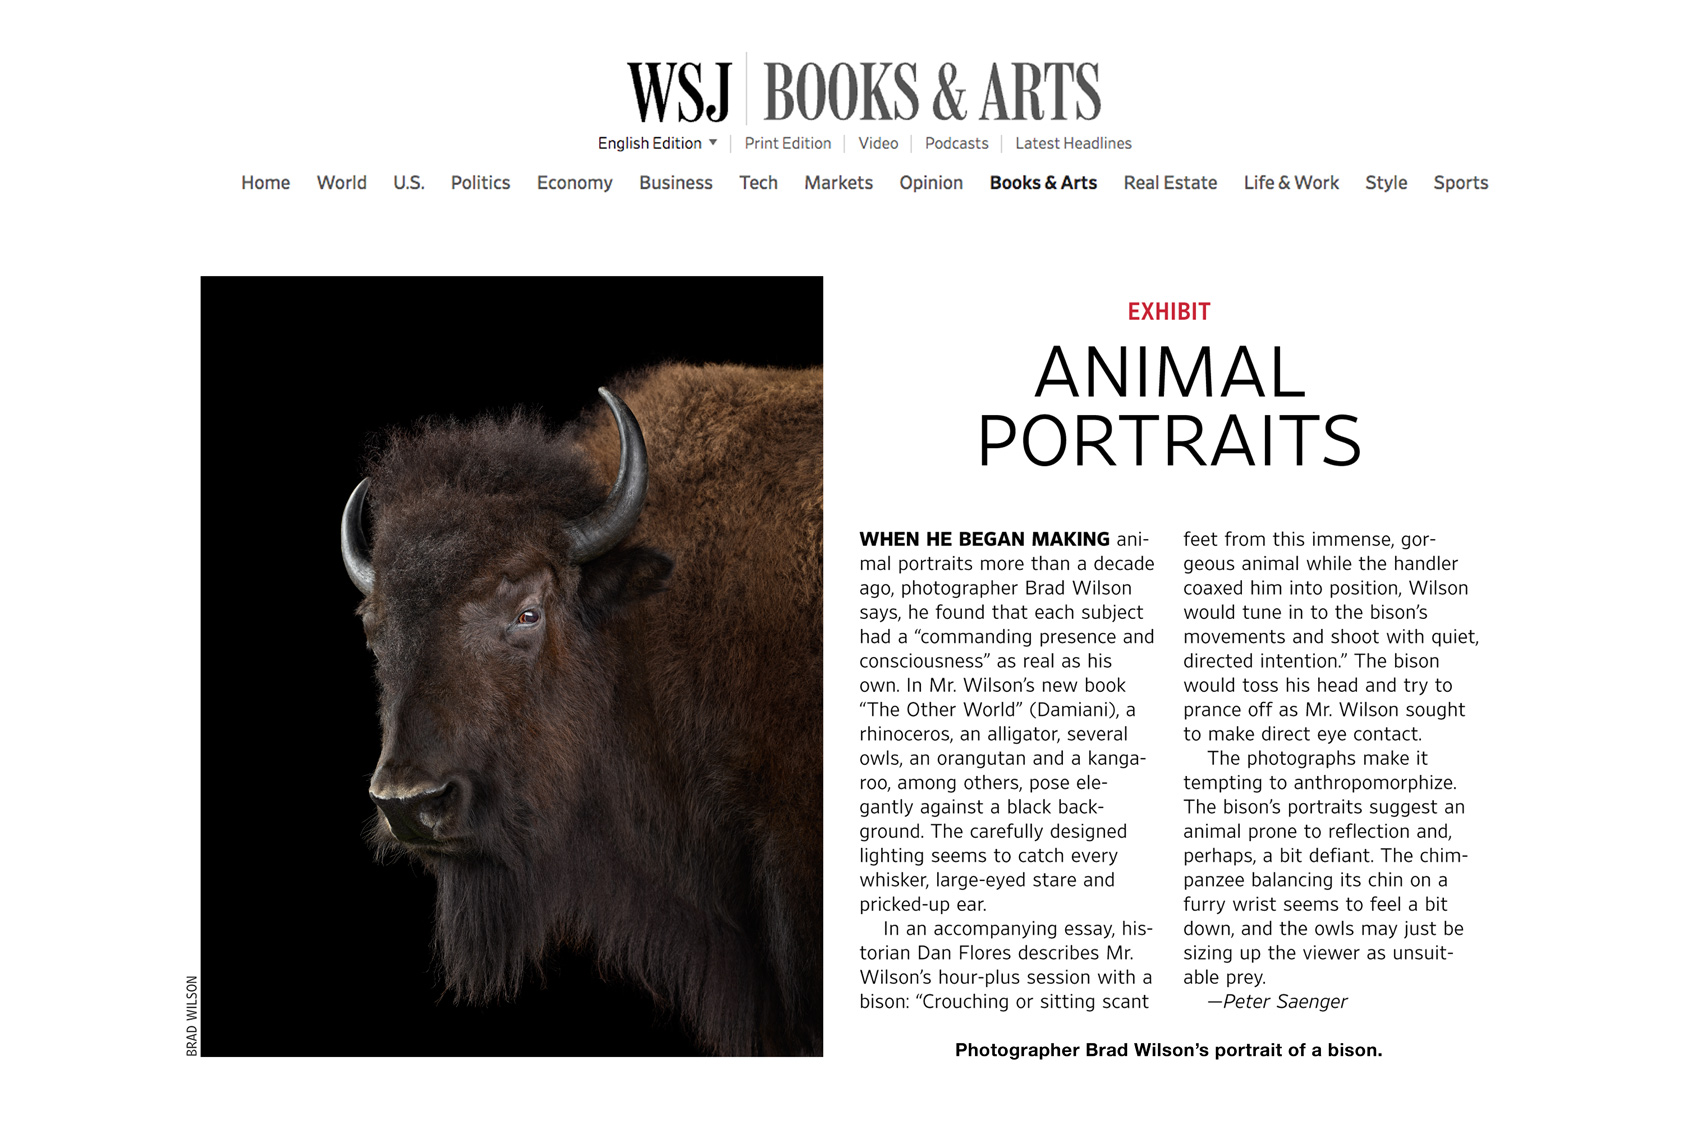 Wall Street Journal article about the work of wildlife photographer Brad Wilson